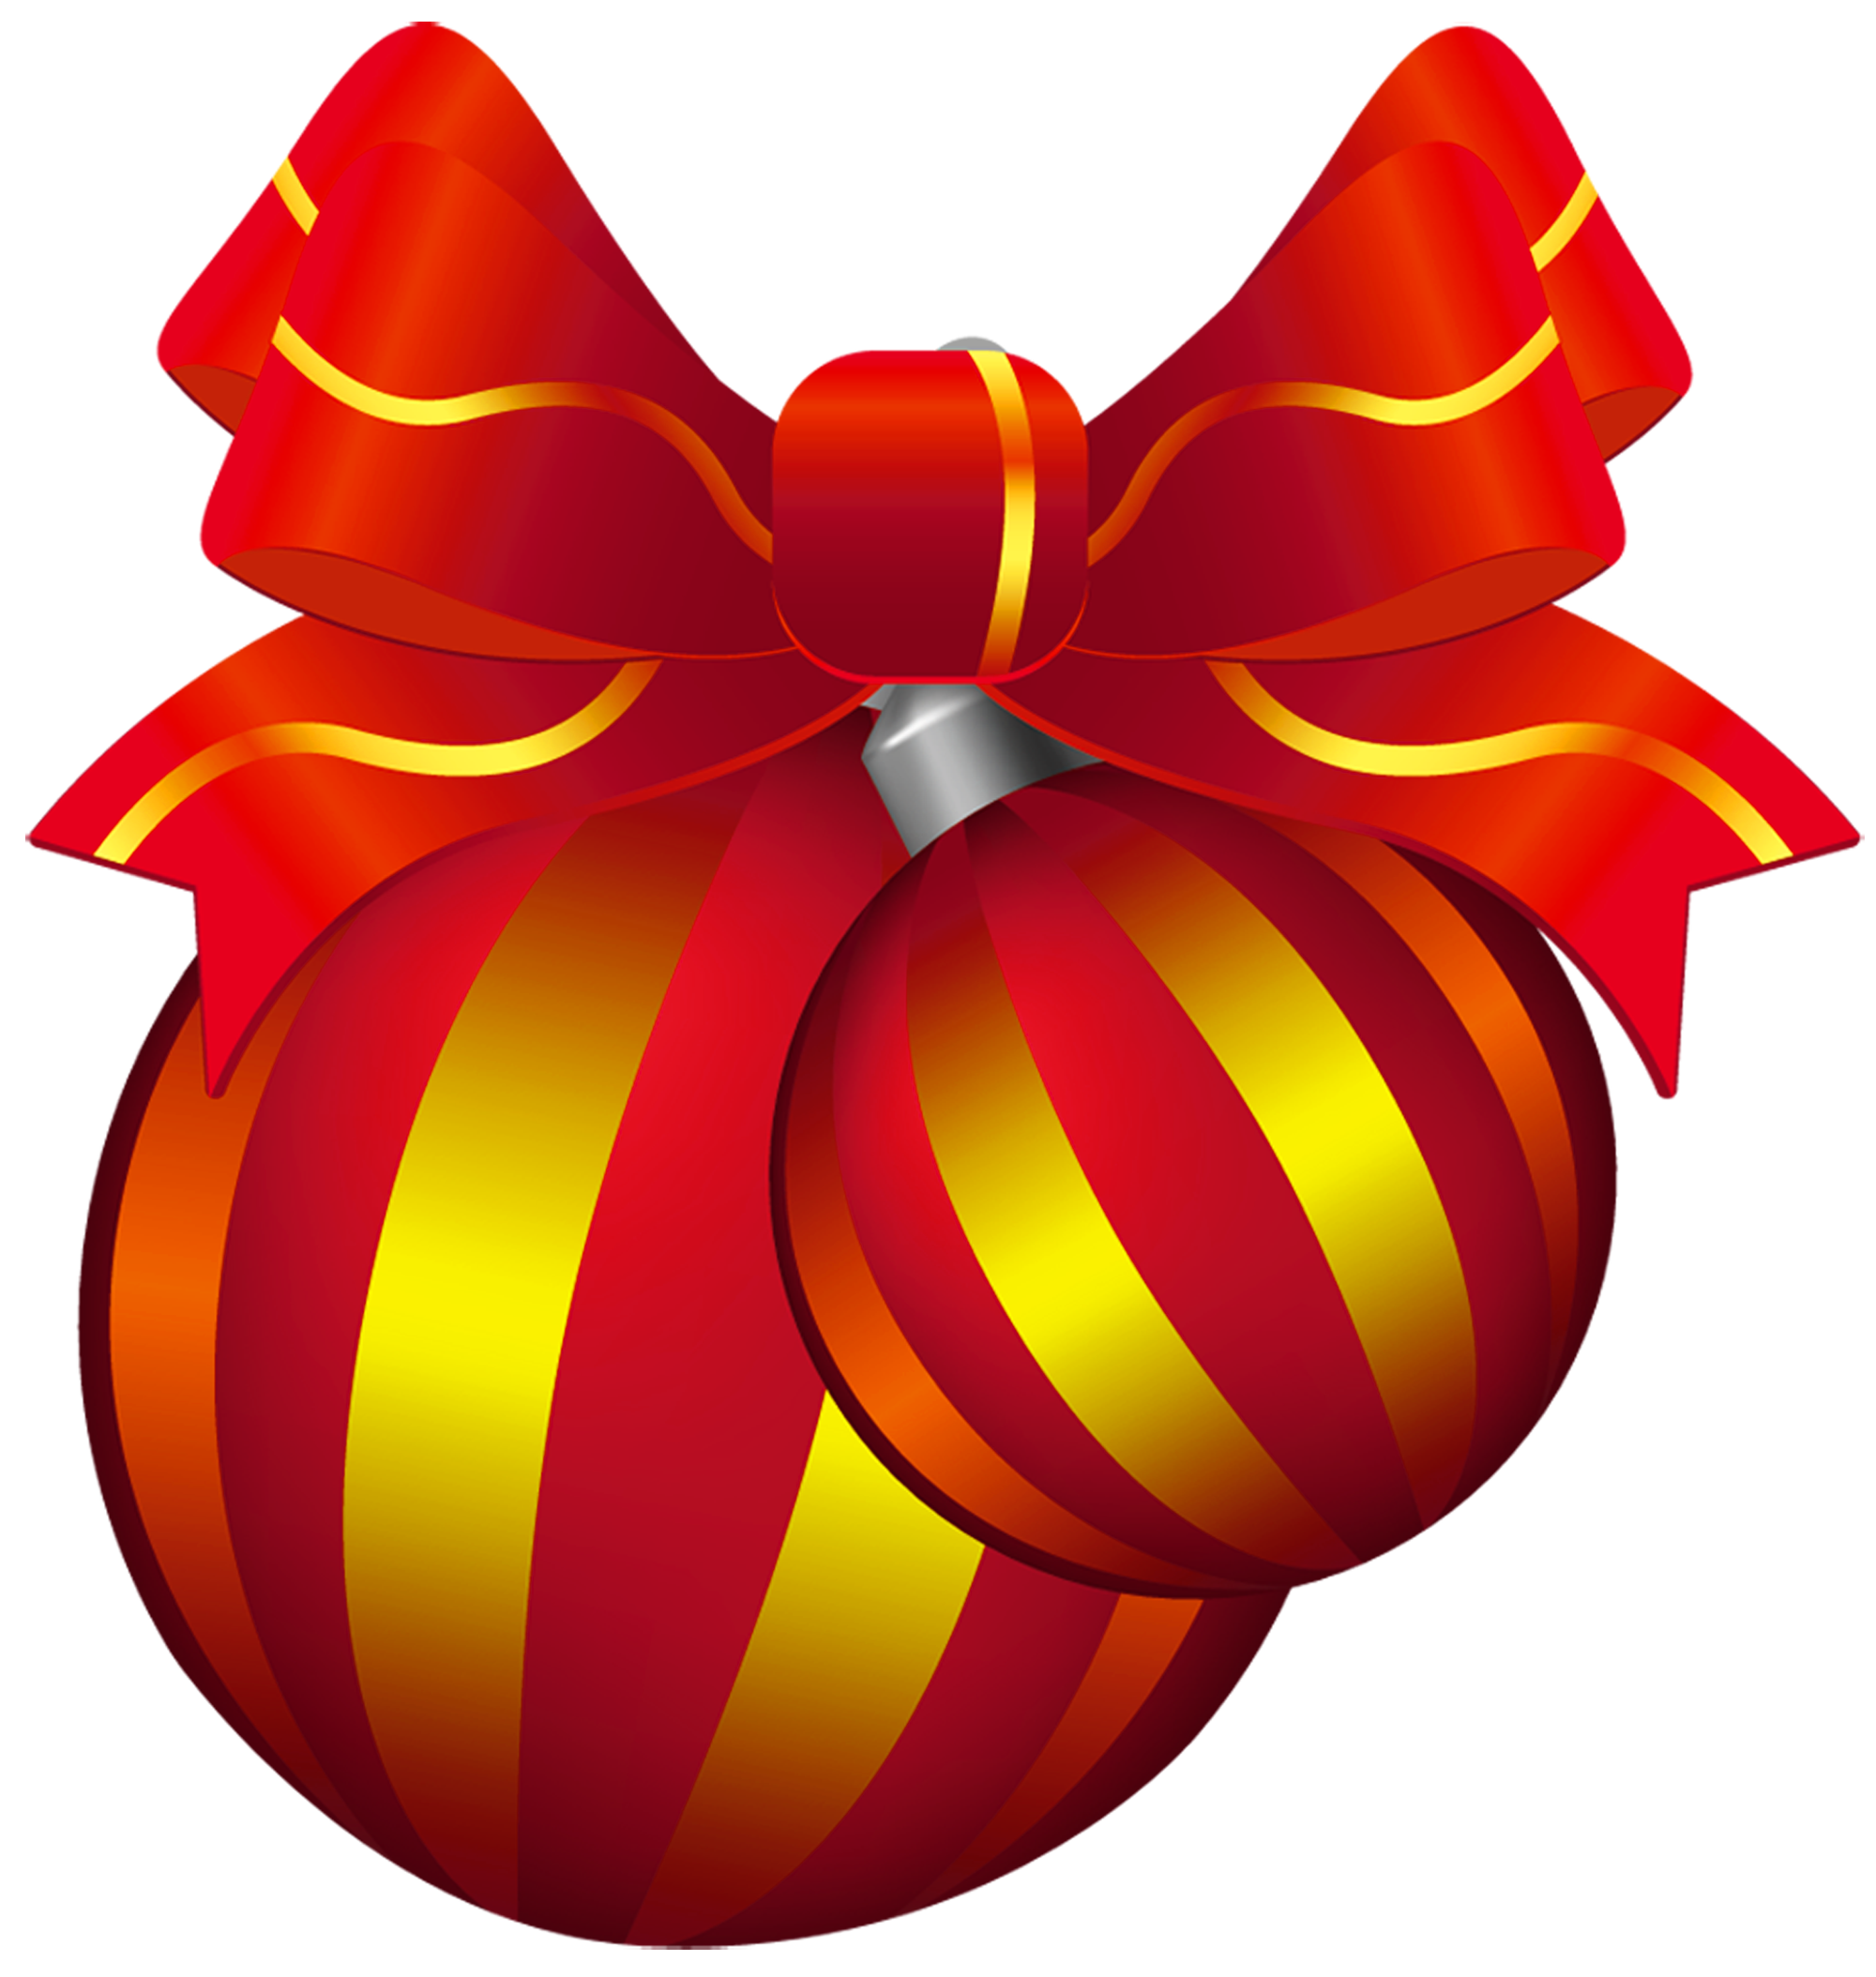 Two Transparent Red and Yellow Christmas Ball PNG Clipart